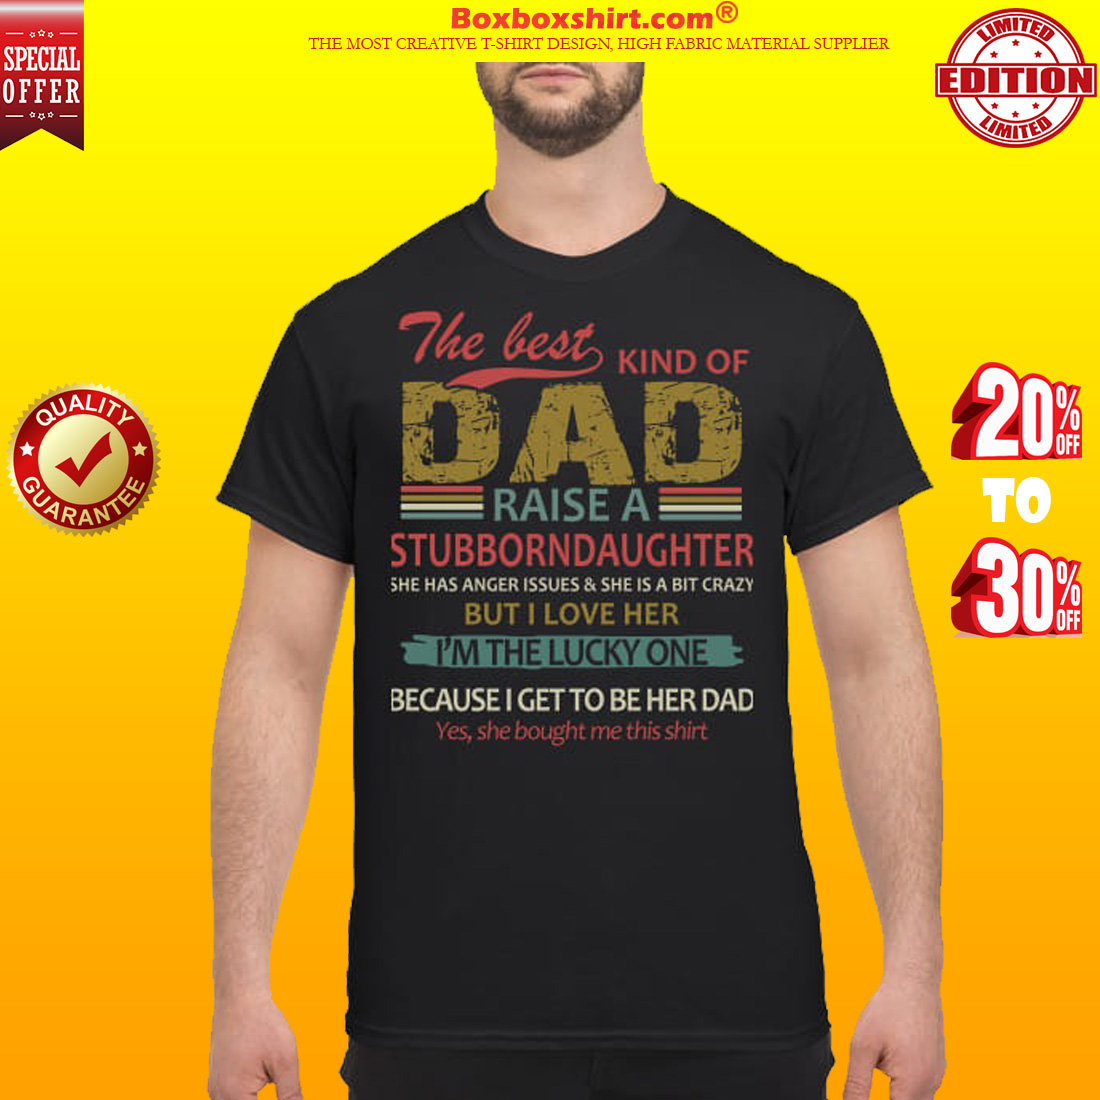 The best kind of dad raise a stubborndaughter shirt